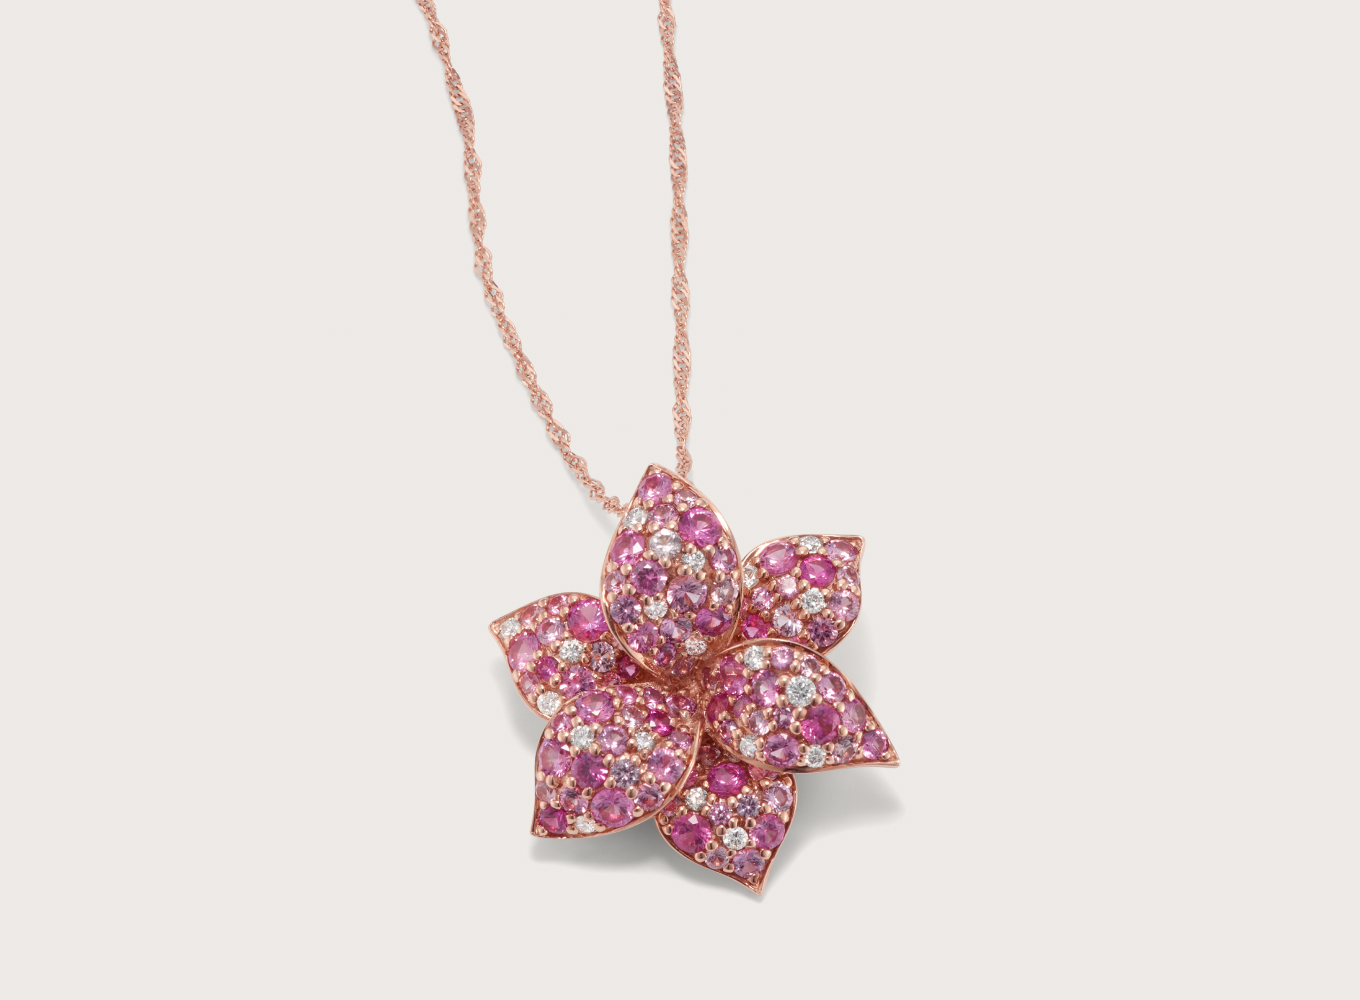 Mosaic Pink Sapphire & Diamond Flower Pendant Natural diamonds and varying shades of natural pink sapphire decorate the petals of this flower pendant with stunning color. Crafted in vivid 14-karat rose gold, a matching Singapore chain with a lobster clasp keeps this look secure.